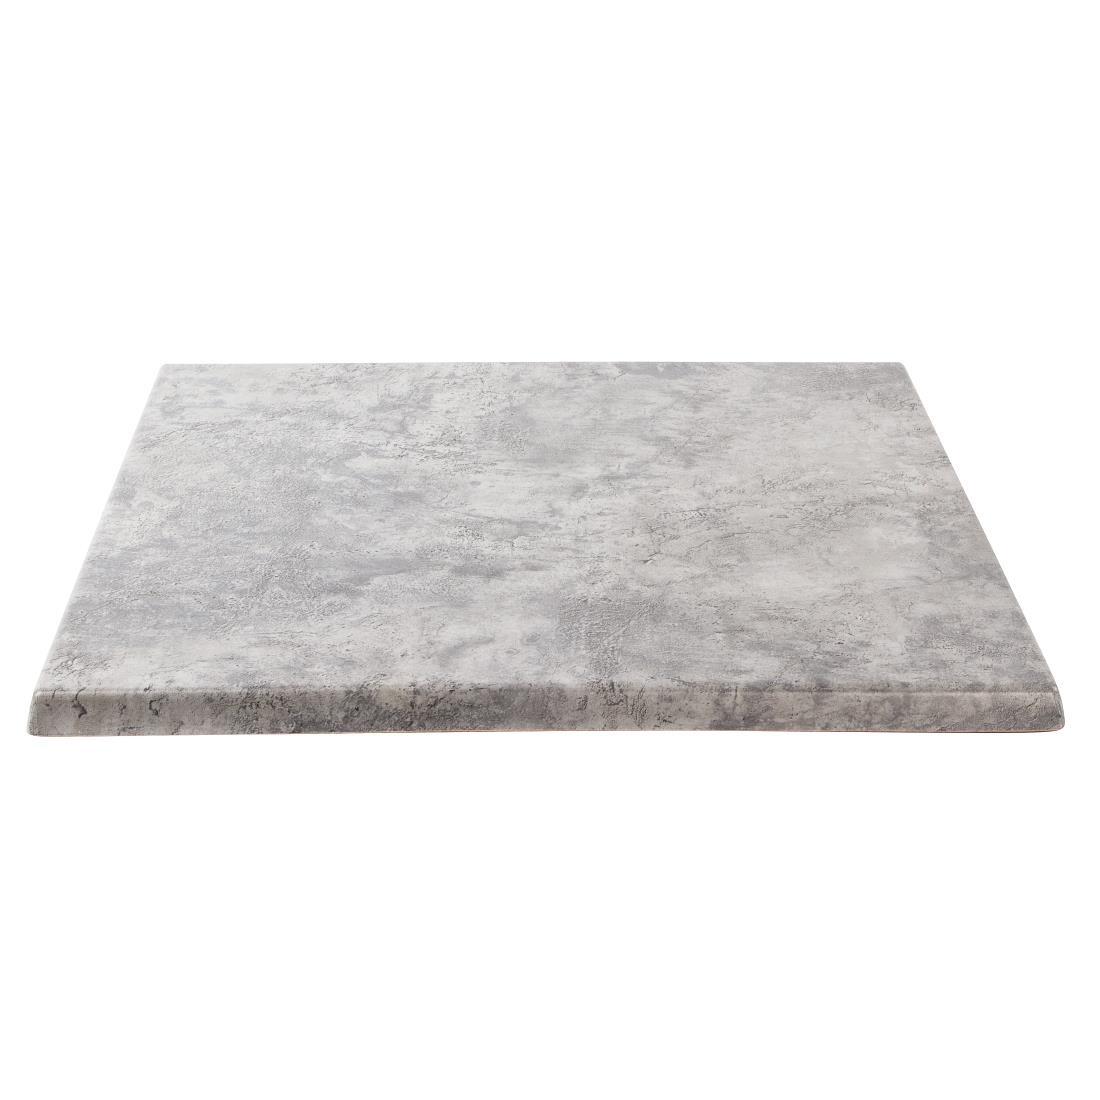 Werzalit Pre-drilled Square Table Top  Concrete 600mm - GM422  - 3